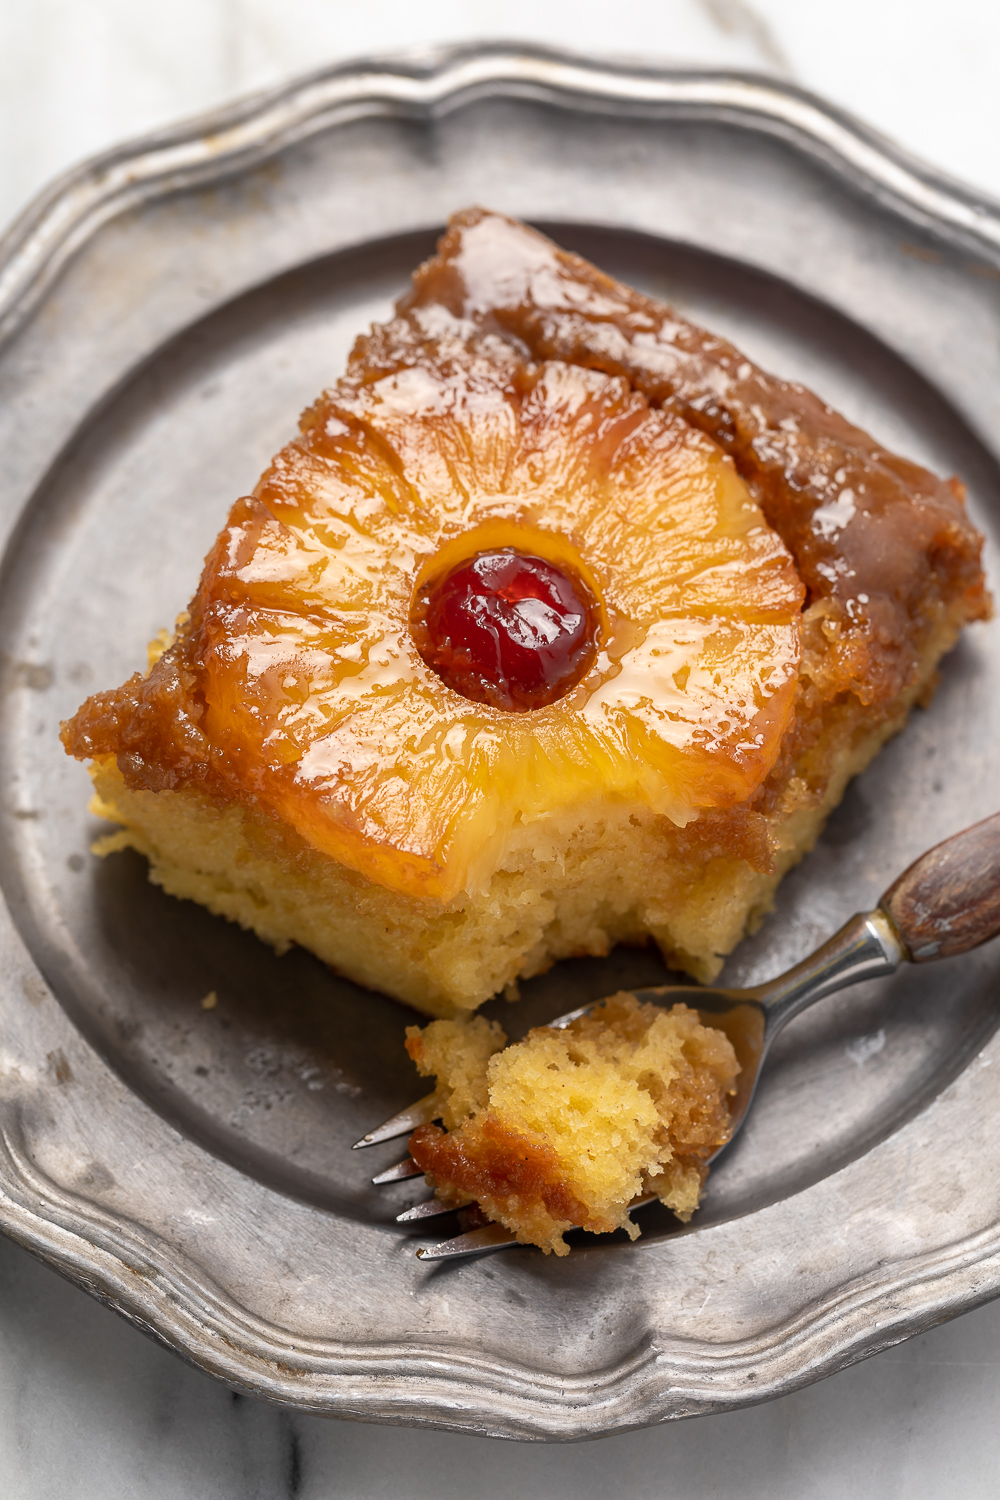 Pineapple Upside-Down Cake is sticky, sweet, and so delicious! This version serves a crowd and is easy enough to whip up on a weeknight! Delicious with a scoop of vanilla ice cream on top! 